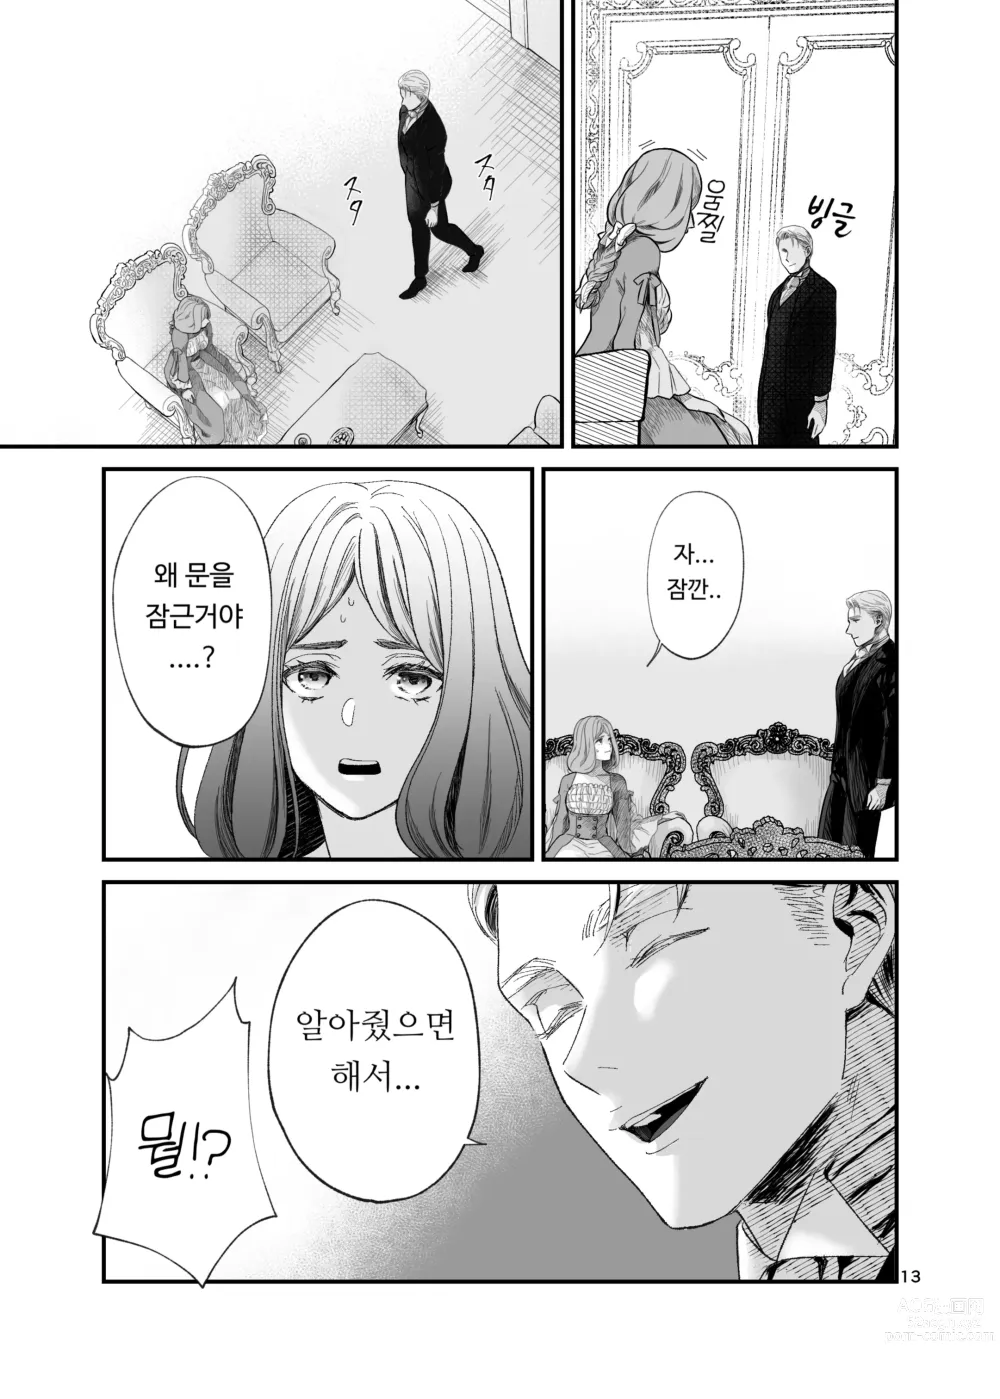 Page 13 of doujinshi 수인 영애와 혼약자